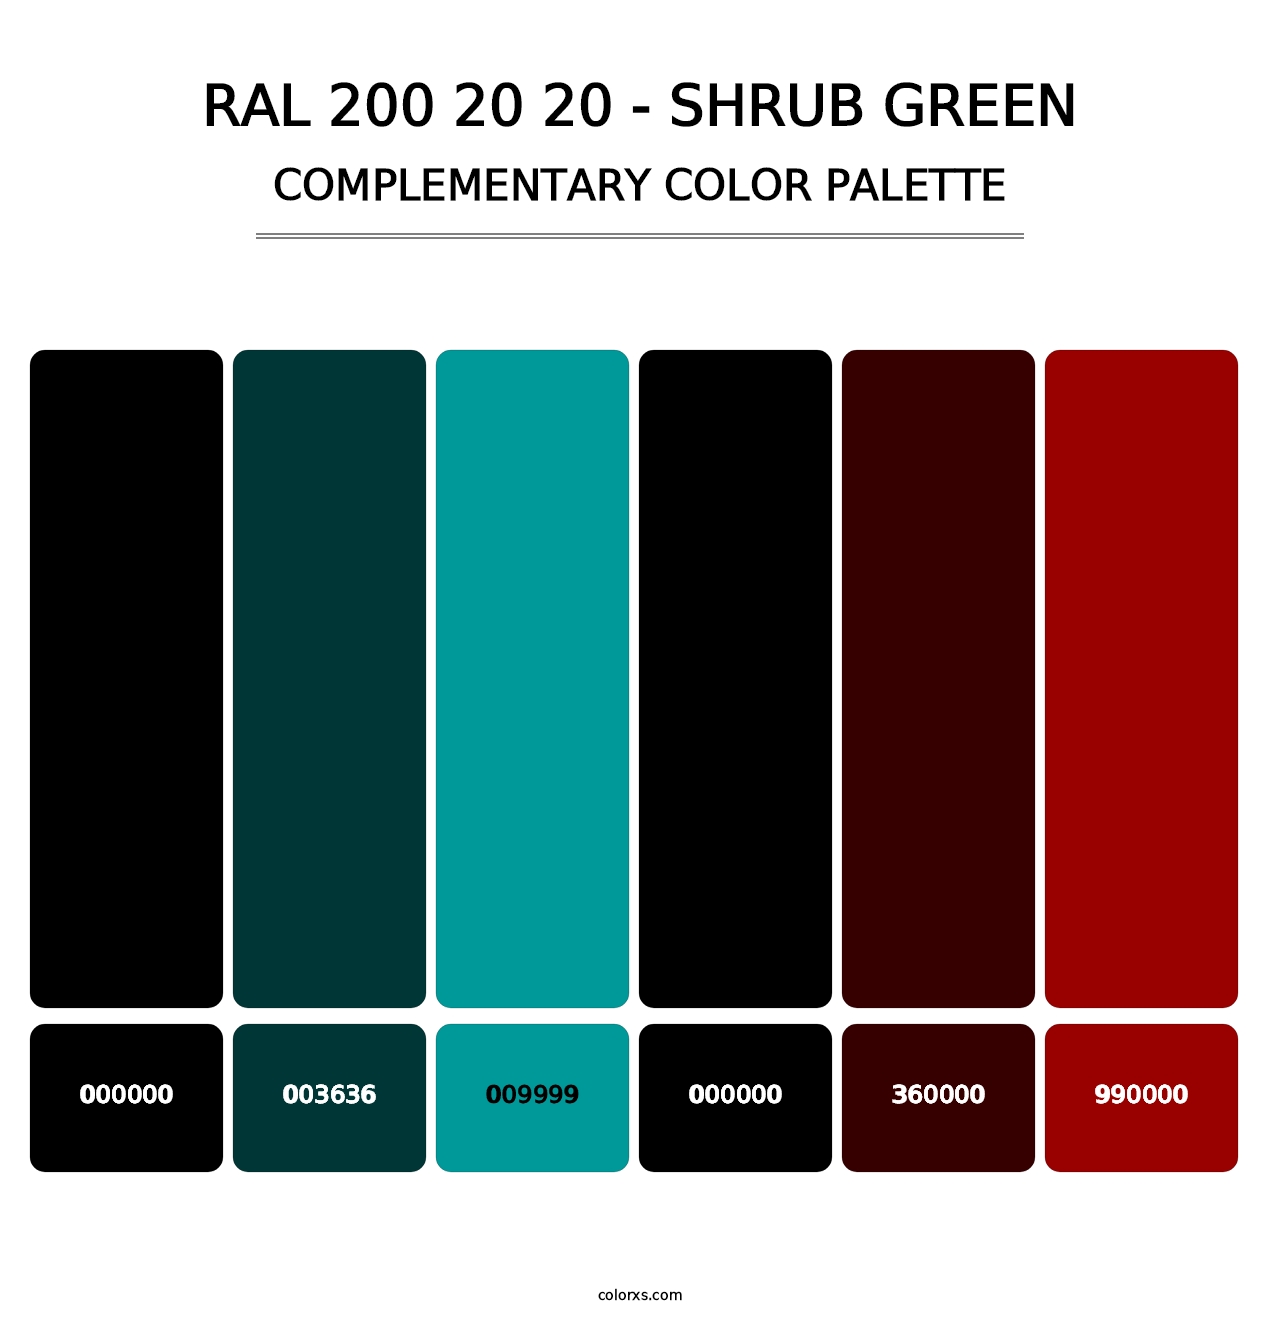 RAL 200 20 20 - Shrub Green - Complementary Color Palette